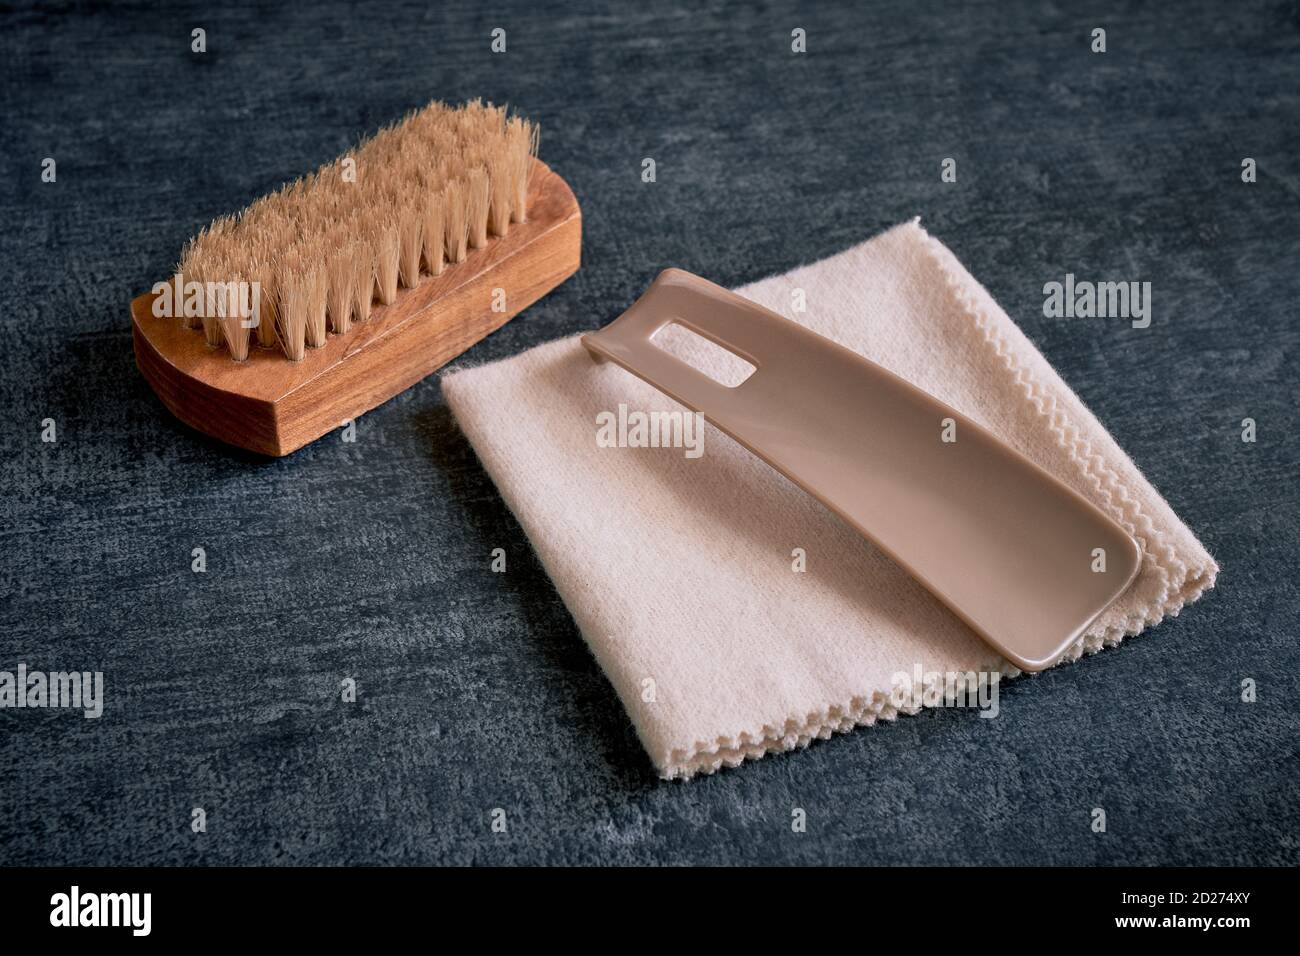 Shoe Cleaning Kit on a grey background Stock Photo